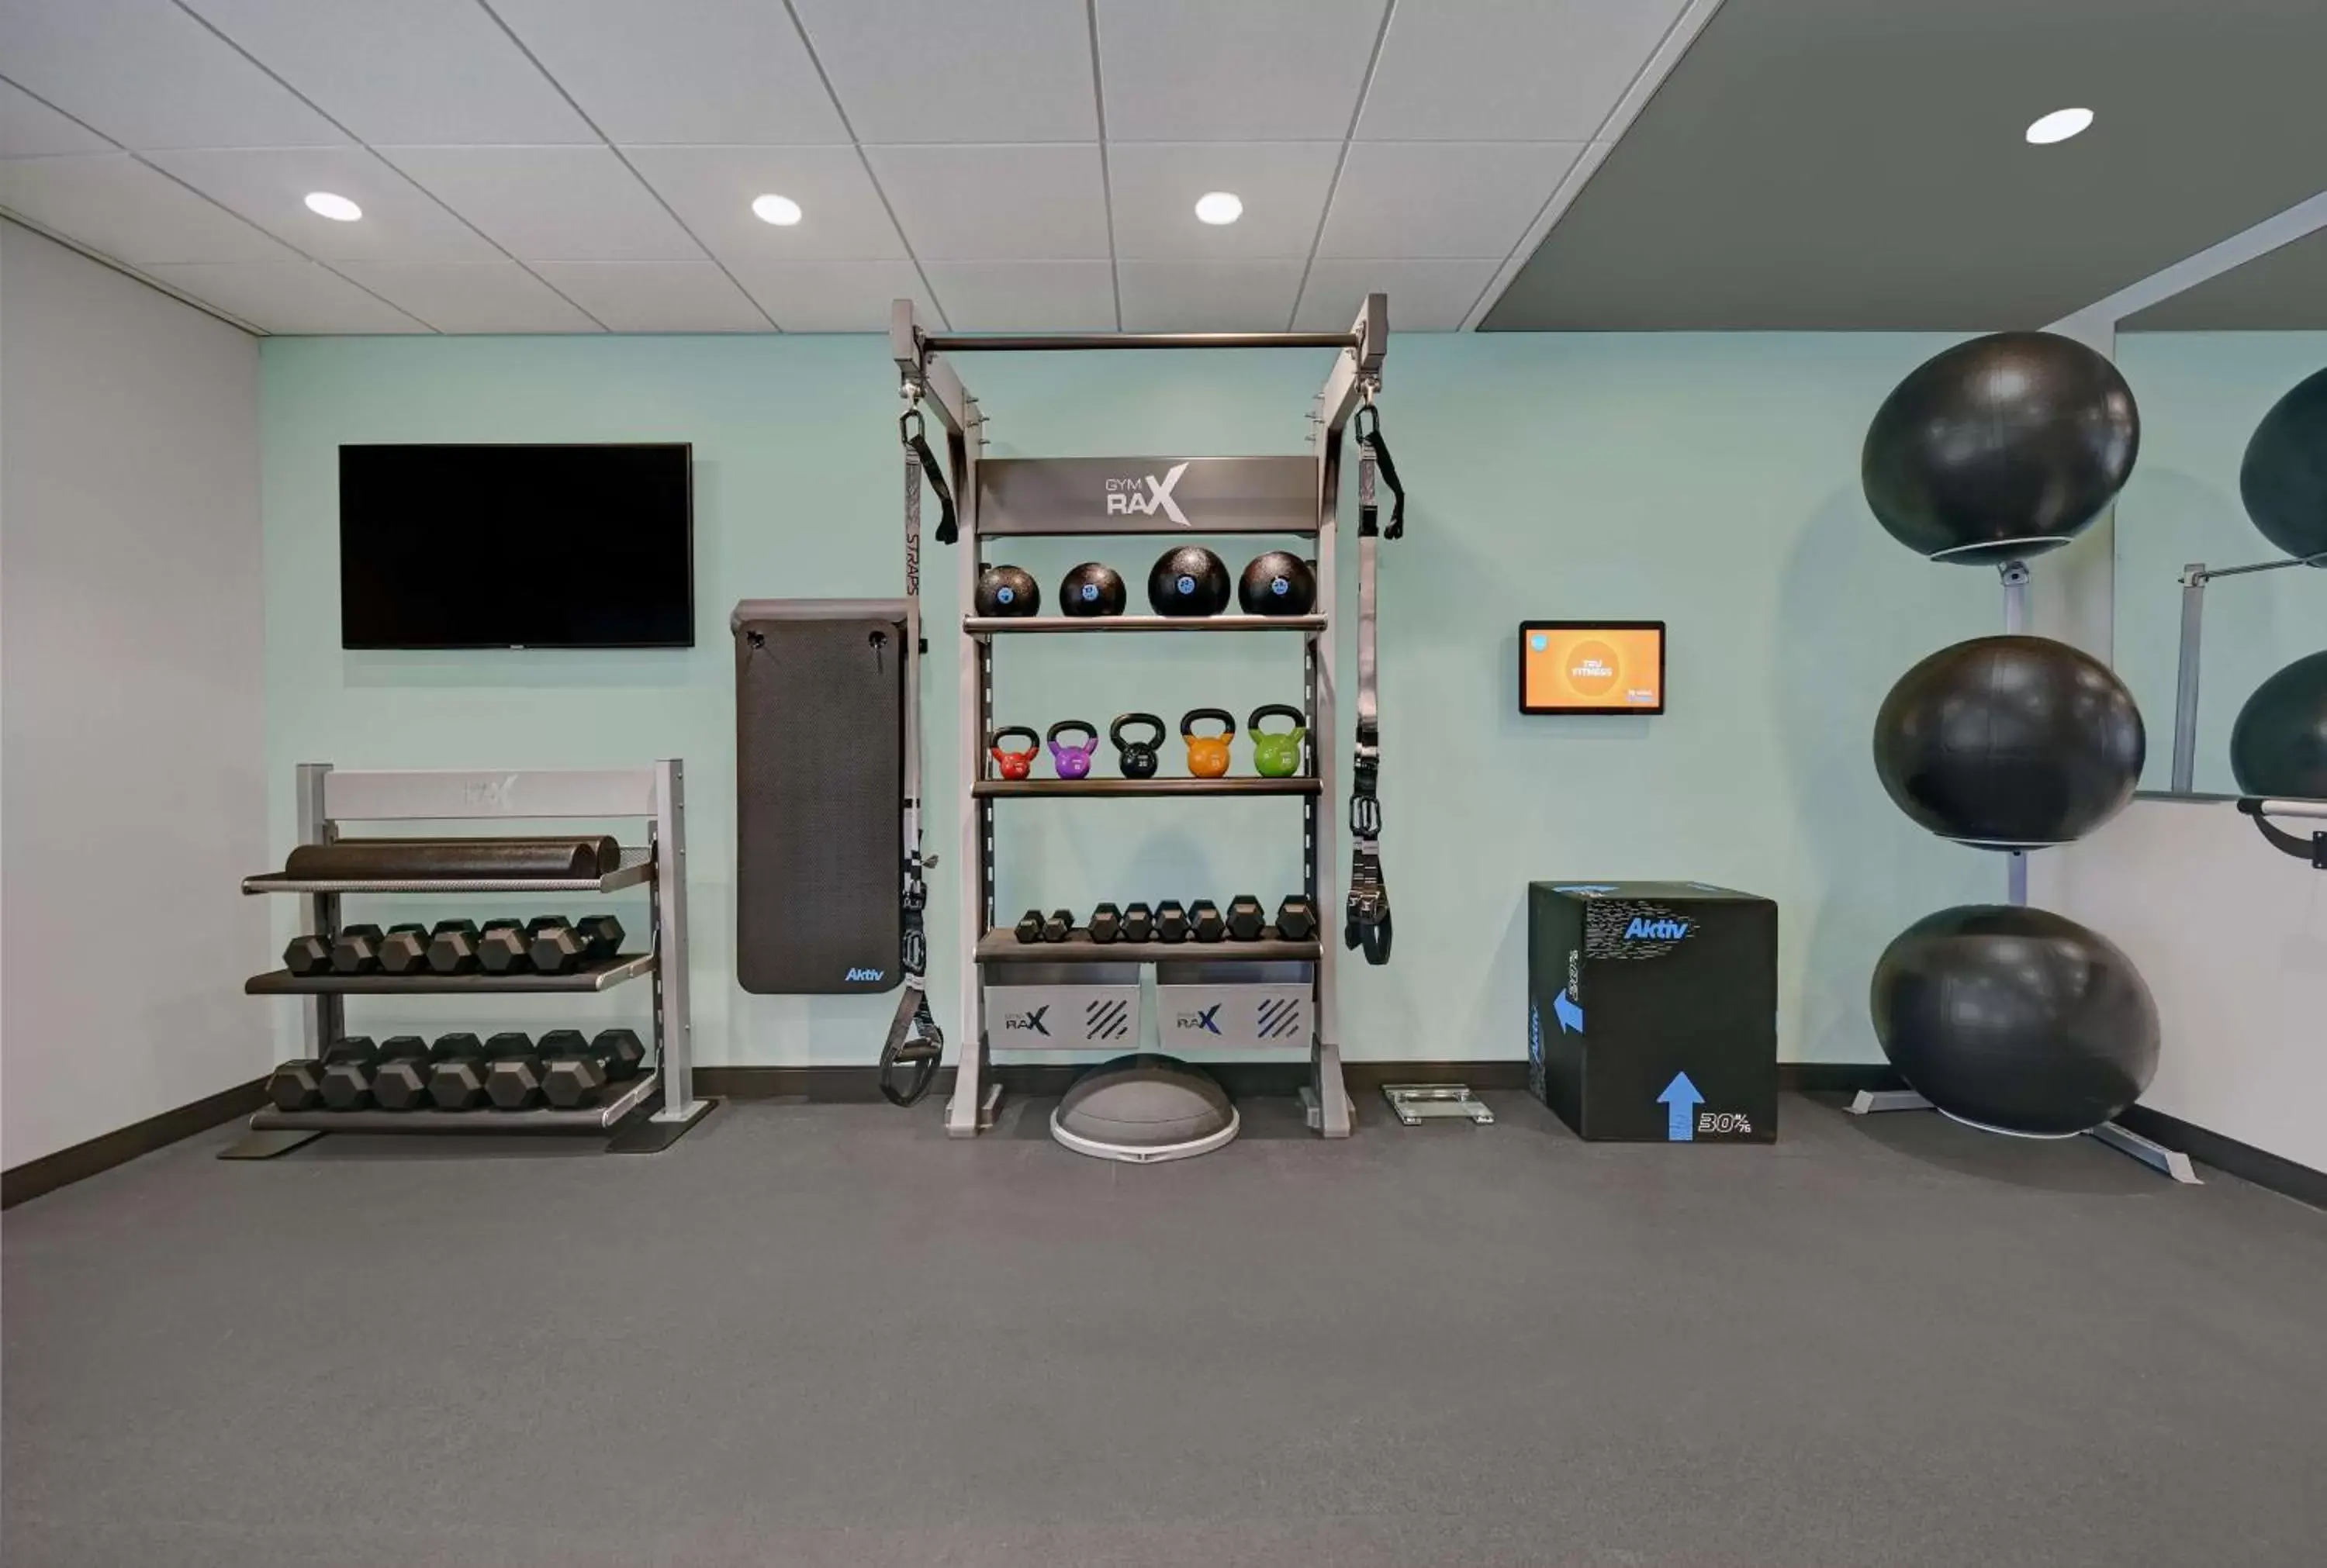 Fitness centre/facilities, Fitness Center/Facilities in Tru By Hilton Troy Detroit, Mi